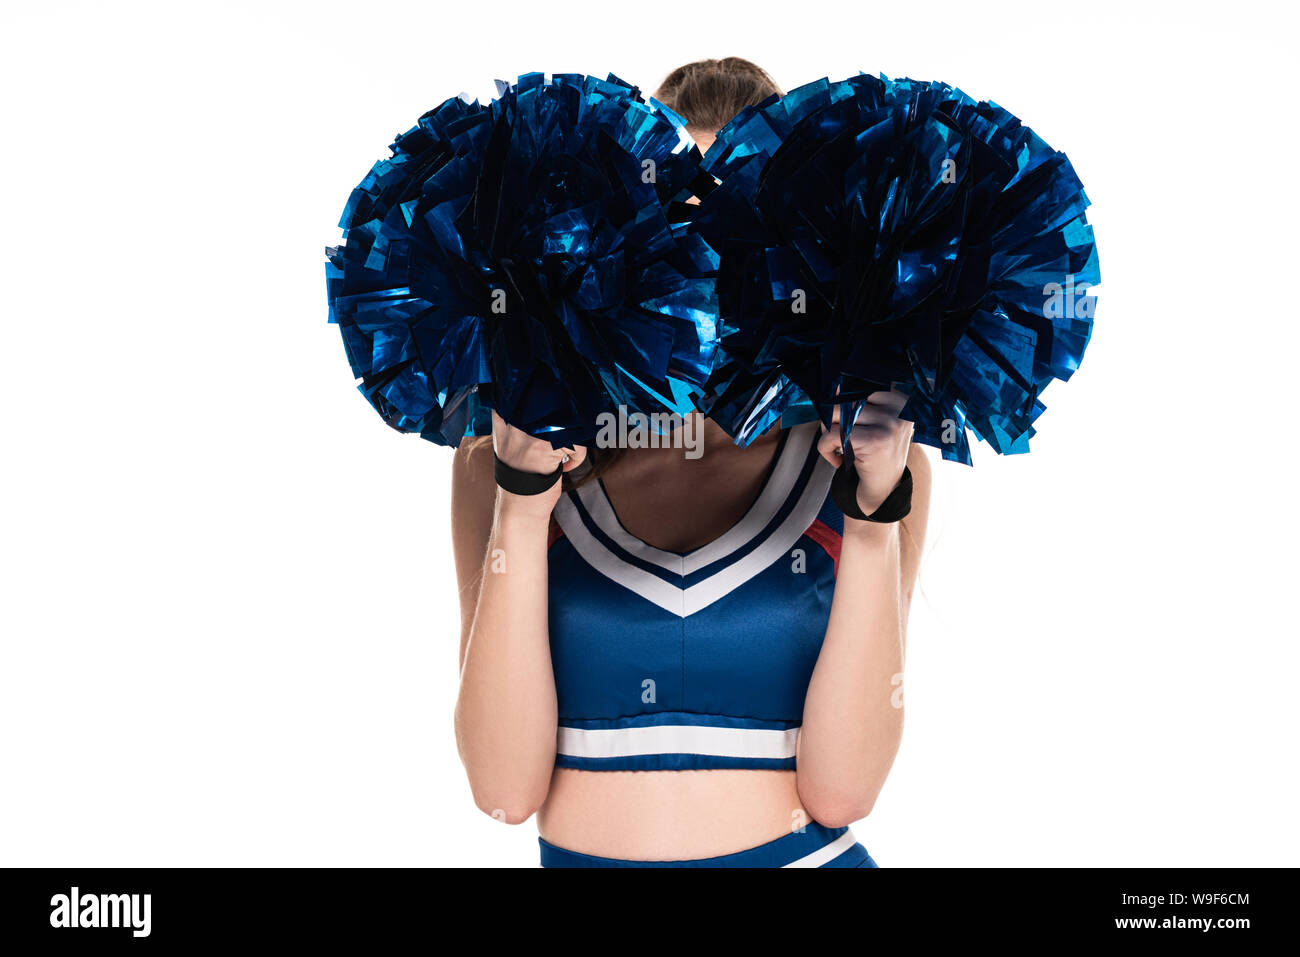 https://c8.alamy.com/comp/W9F6CM/cheerleader-girl-in-blue-uniform-with-obscure-face-and-pompoms-isolated-on-white-W9F6CM.jpg